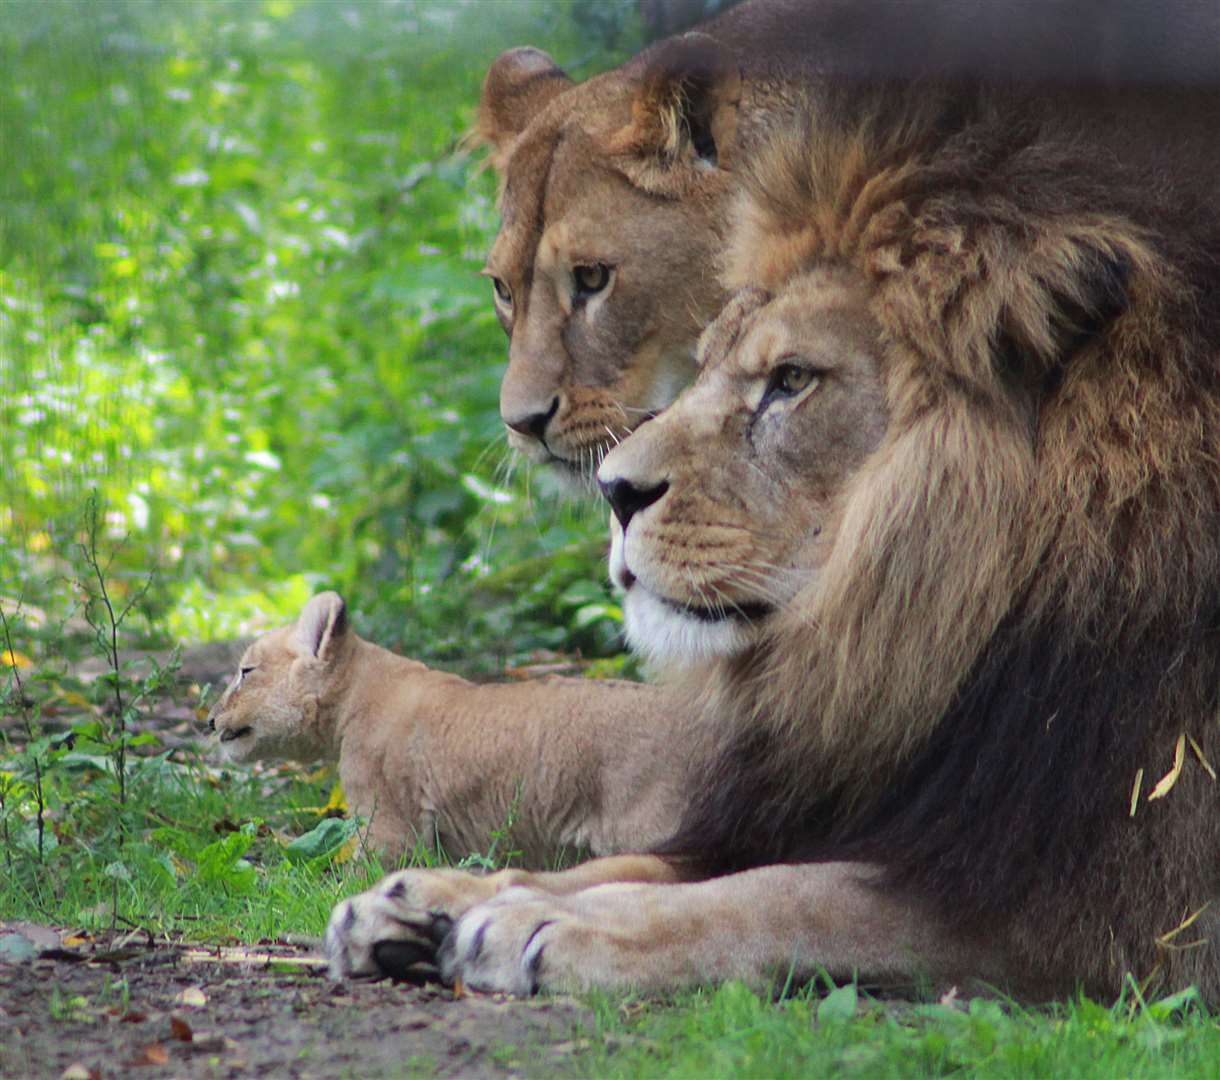 Lions at Port Lympne, run by the Aspinall foundation